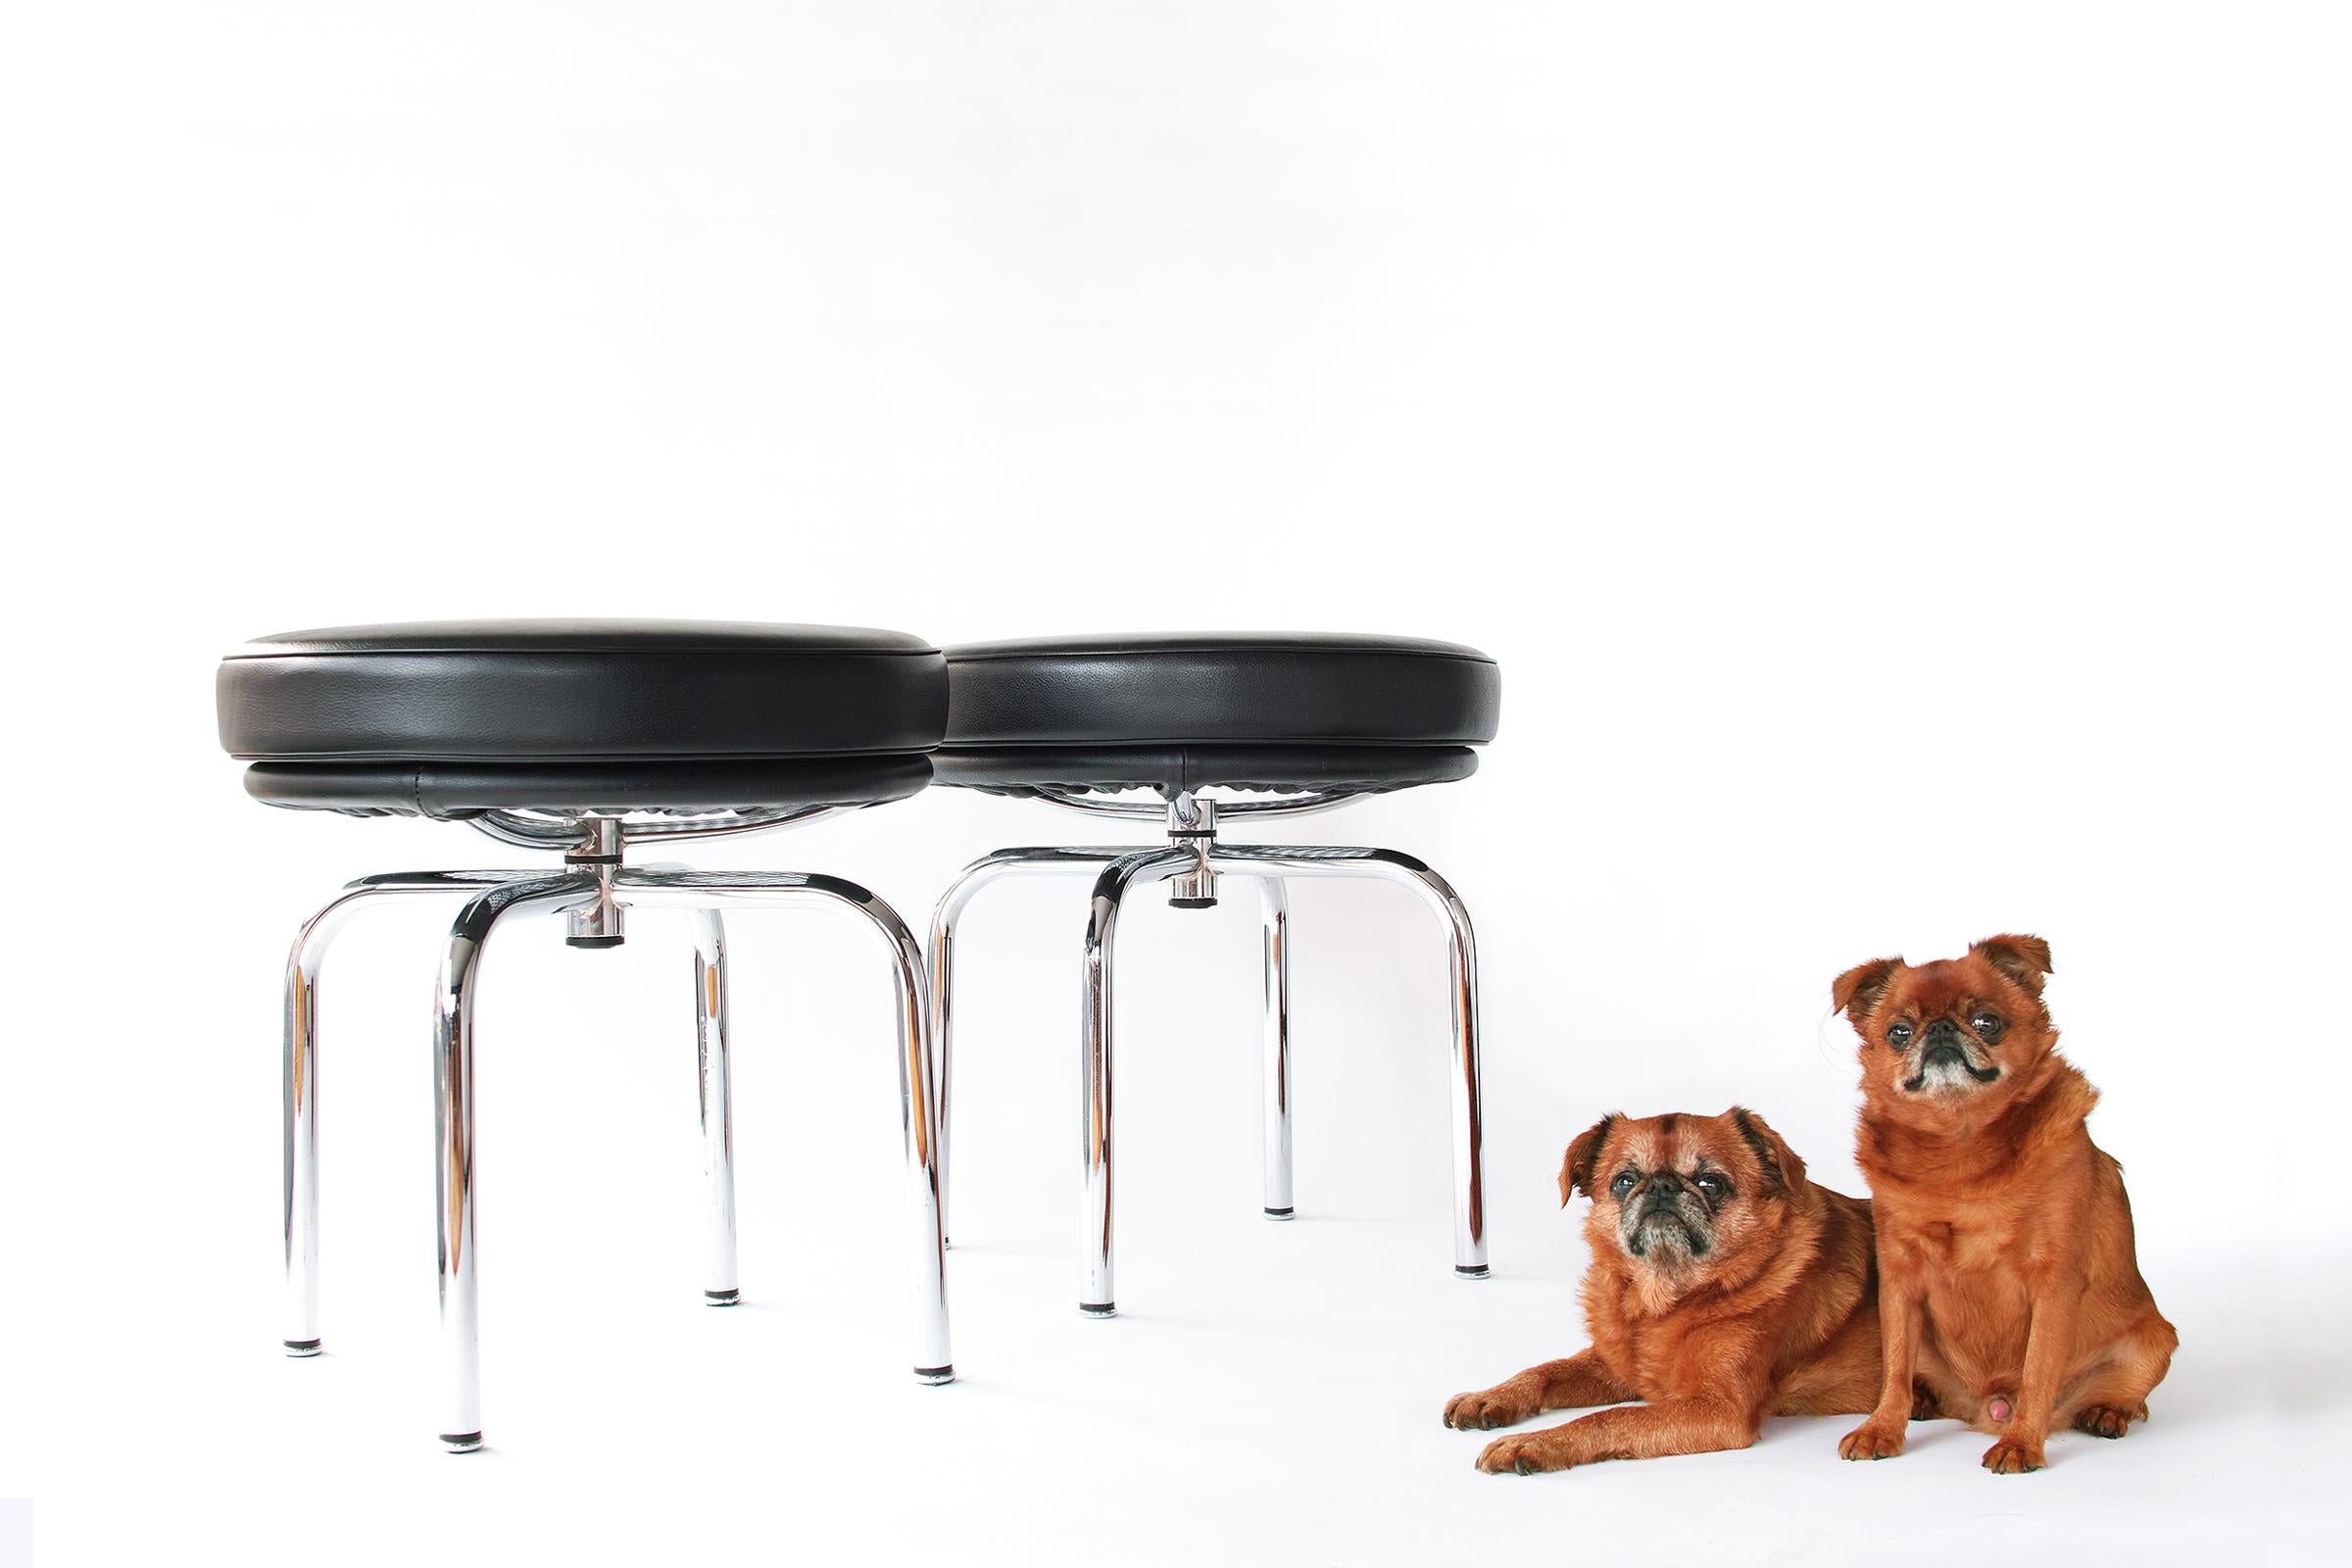 The LC8 swivel stool (1928) evolved from one of a number of experiments, including an attempt to fashion a chair by wrapping inner tubes from tires around a steel frame. As the Le Corbusier group refined such trials, sensuous solutions took form.